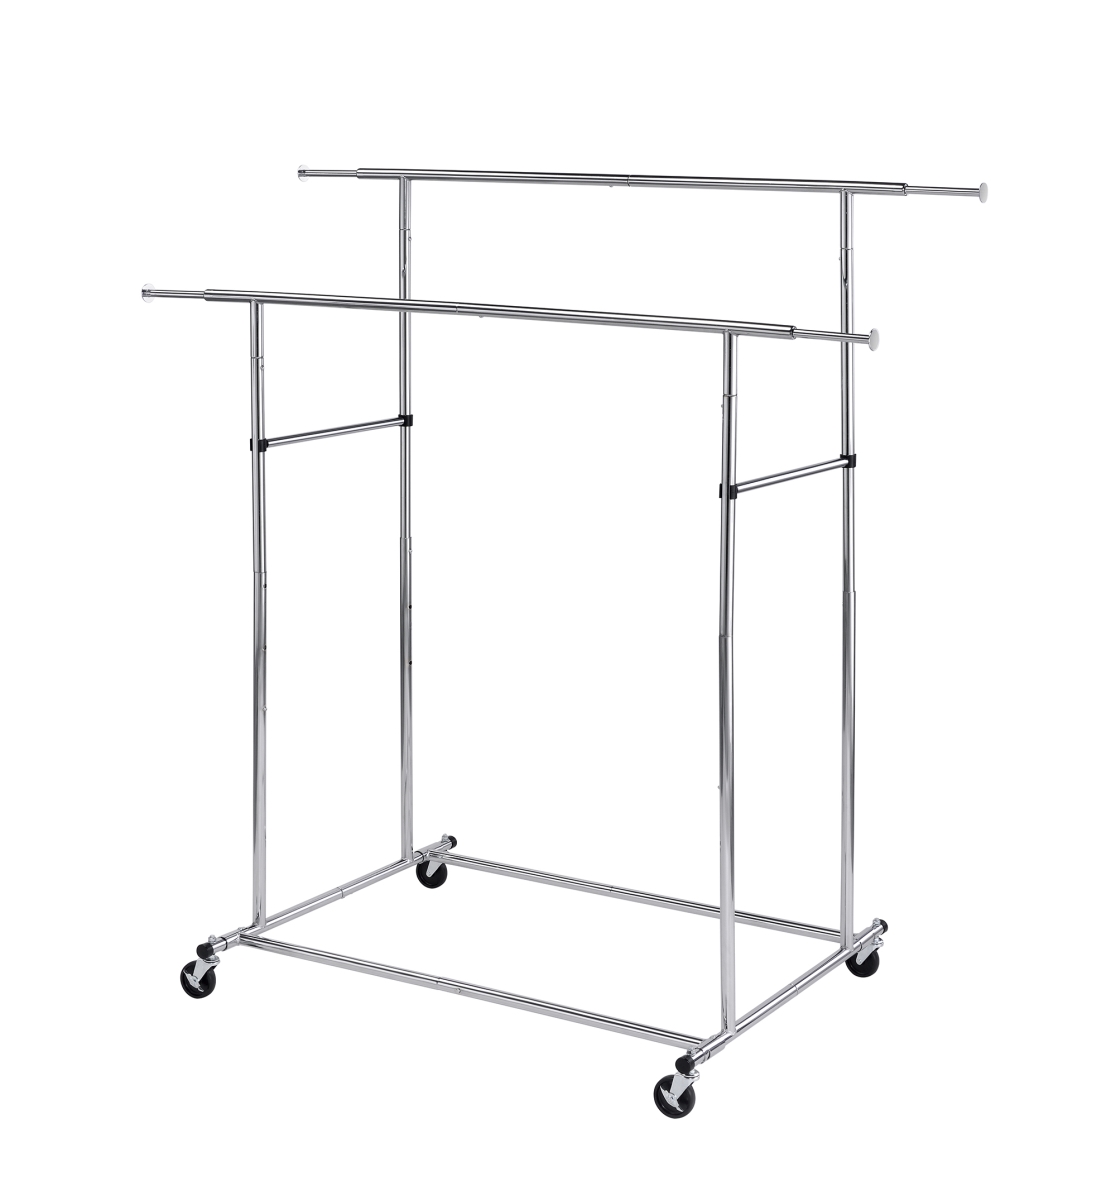 Picture of ORE International FF-2056 65 in. Dual Bar Adjustable Industrial Garment Rack